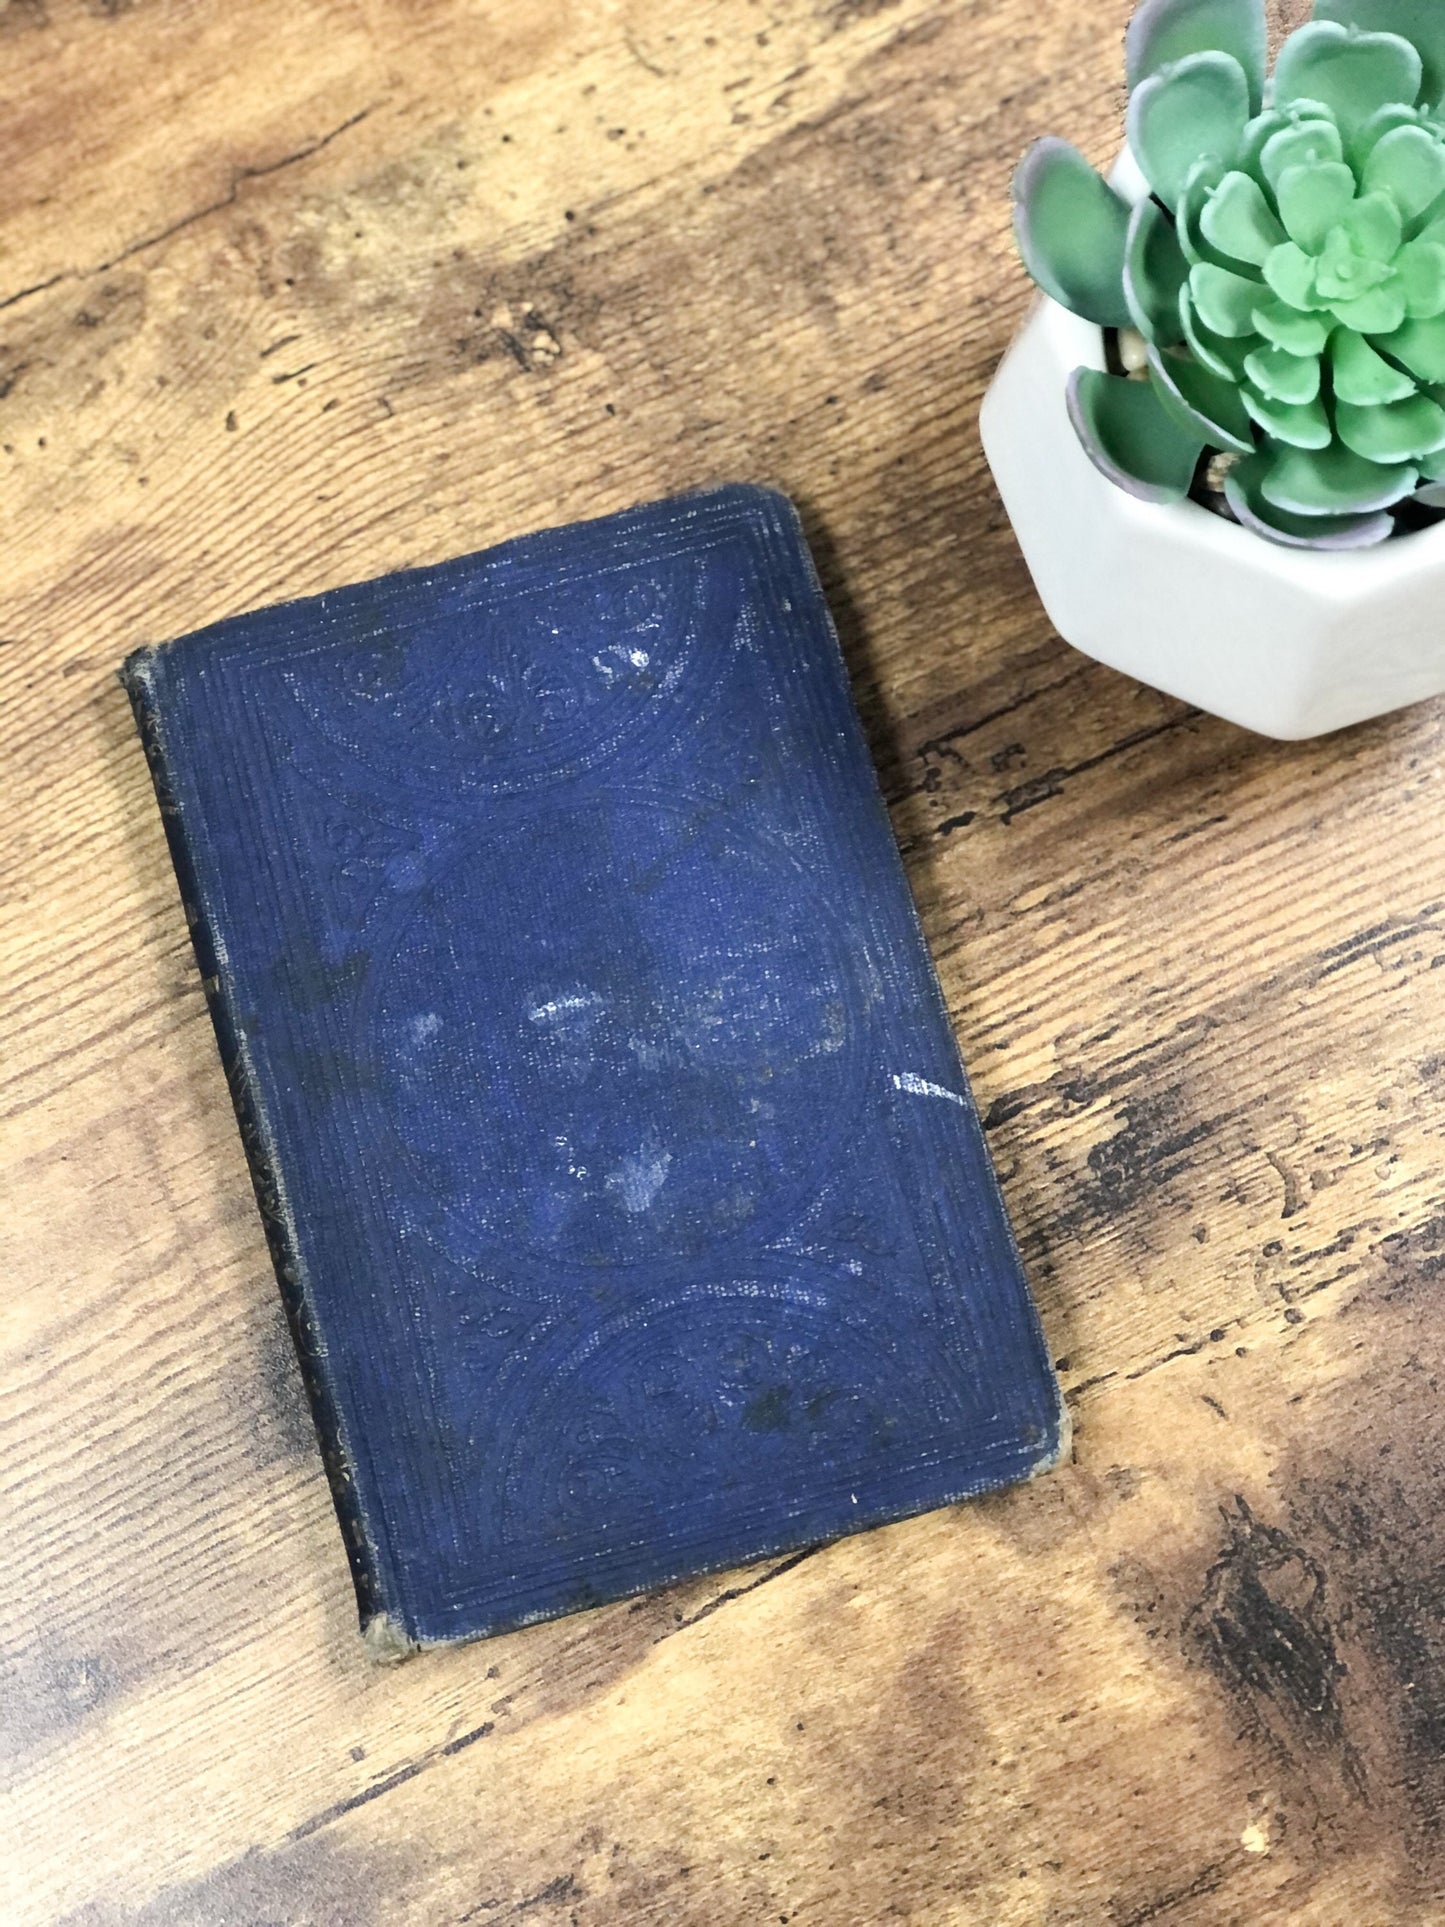 Antique Book, Remarkable Examples of Moral Recovery, Circa 1855